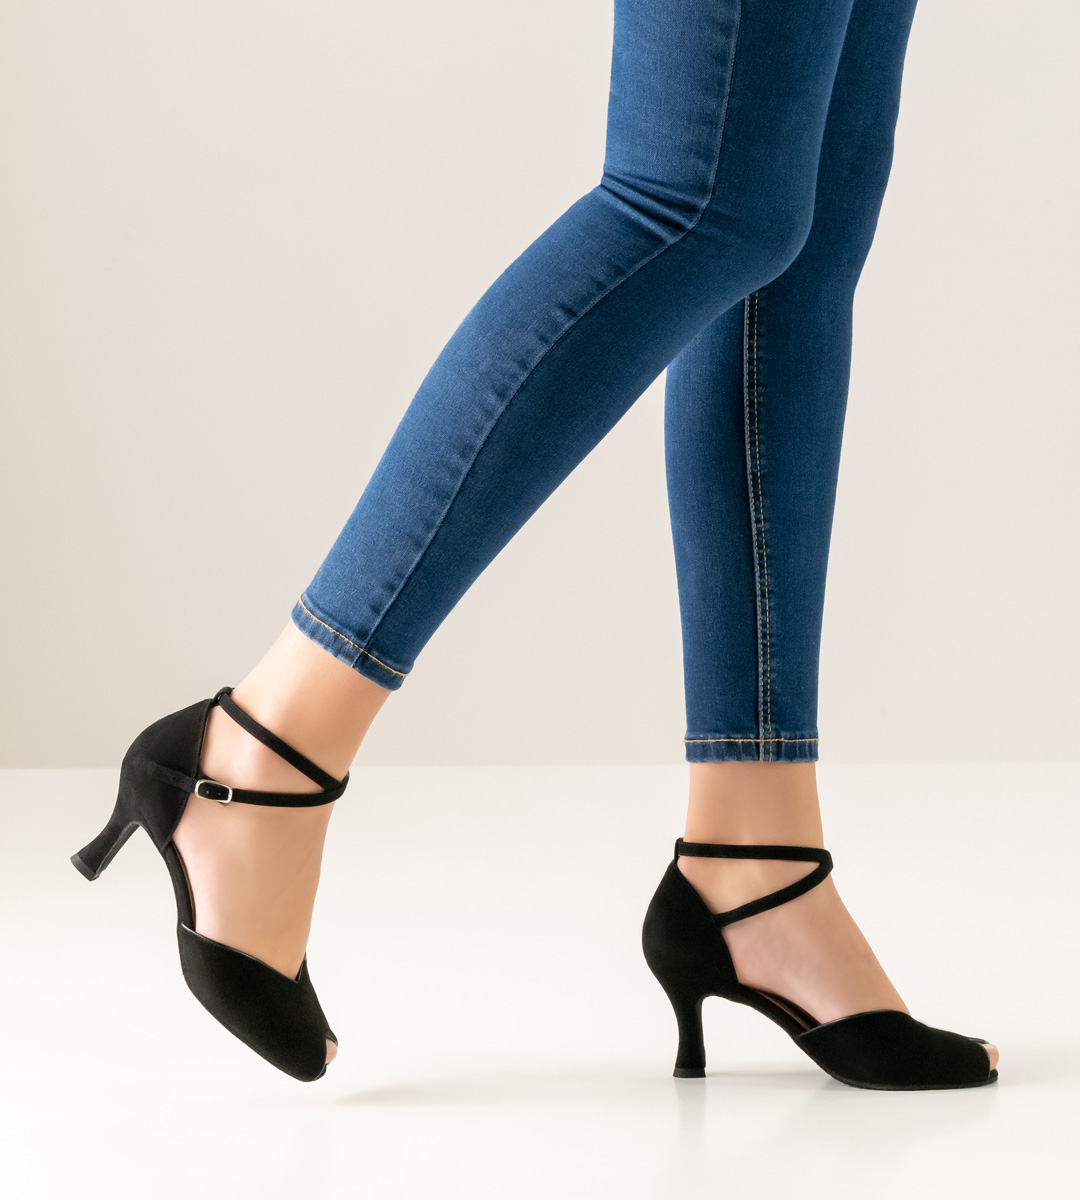 Werner Kern Ladies Dance Shoe with Peep-toe Opening in Combination with Blue Jeans